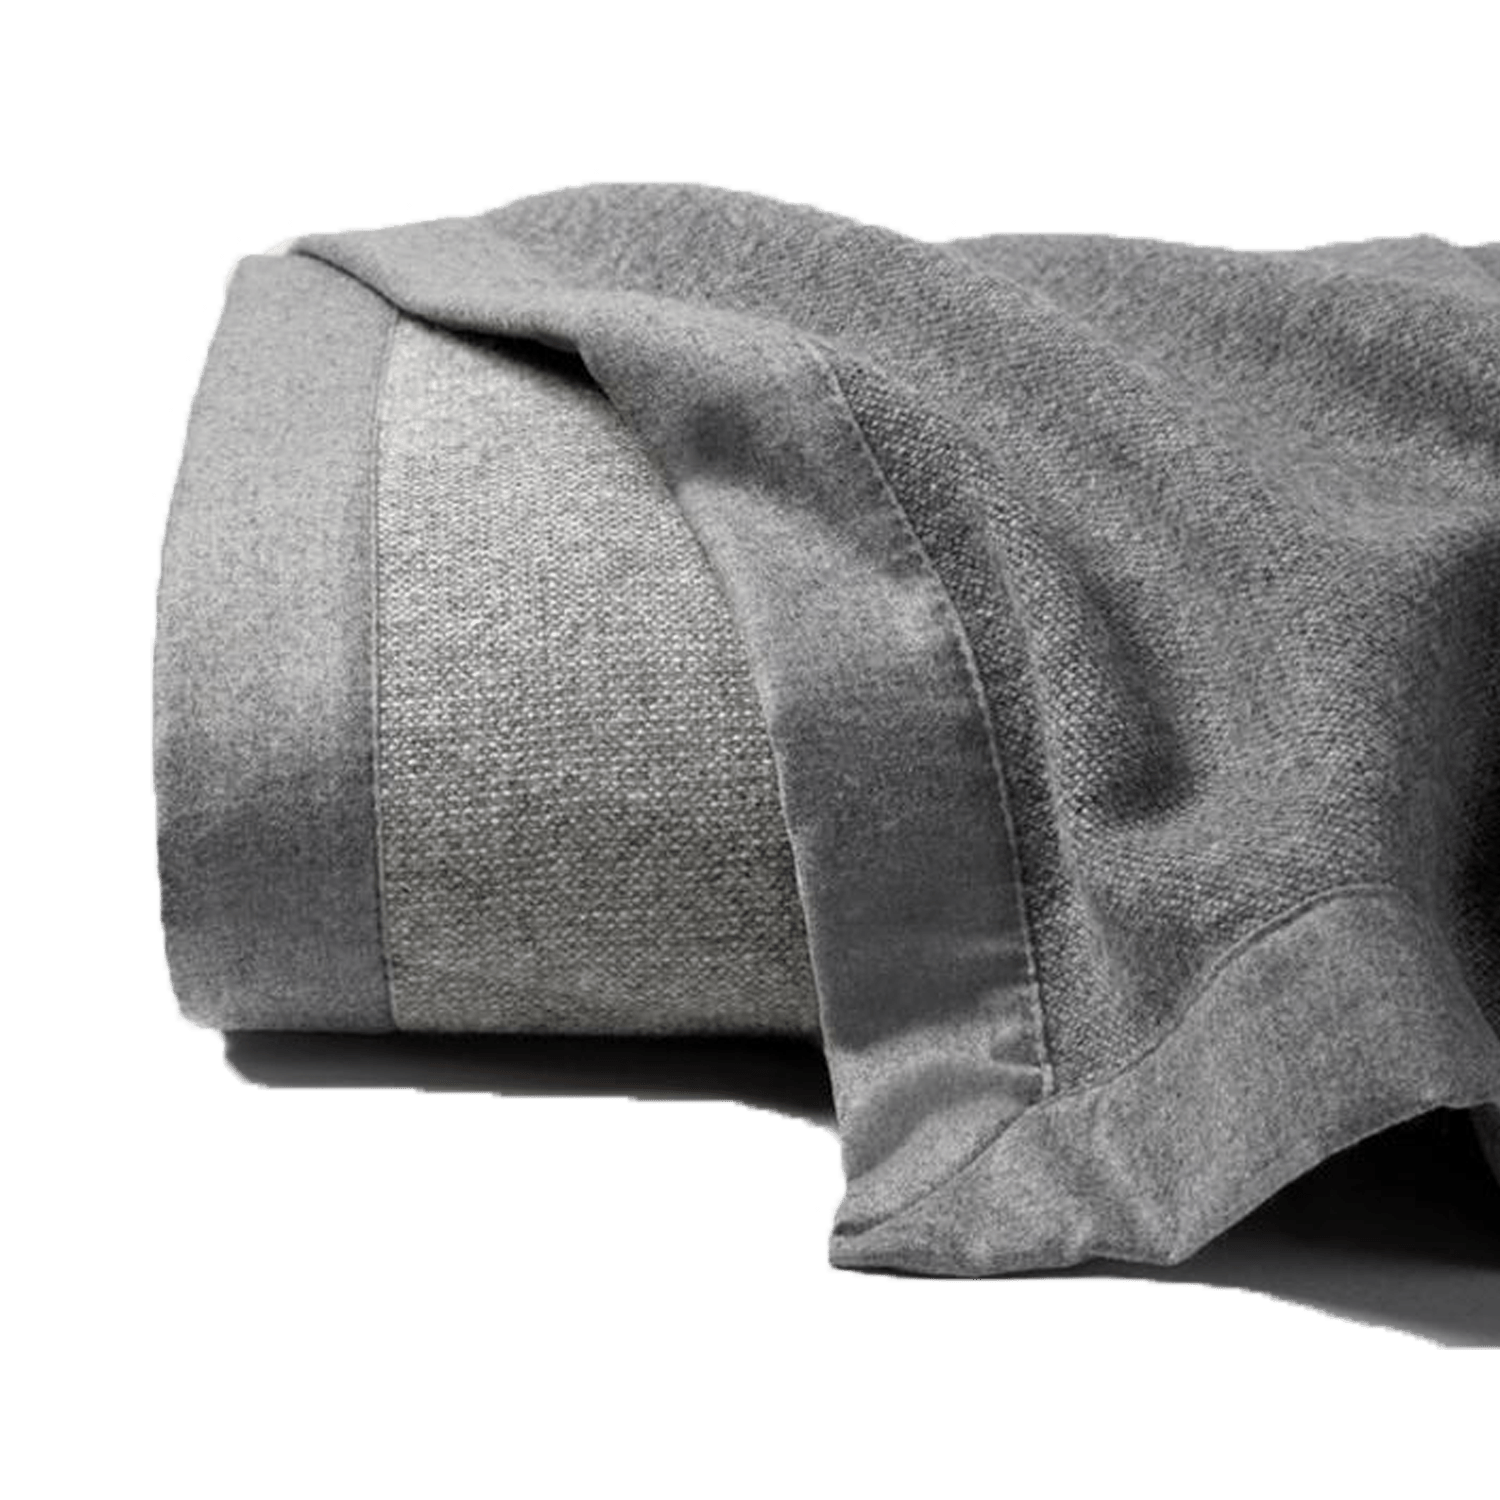 Woven in super-fine Merino wool, the Nerino blanket adds superior warmth and is reversible with differing front and back hues - grey and light grey.